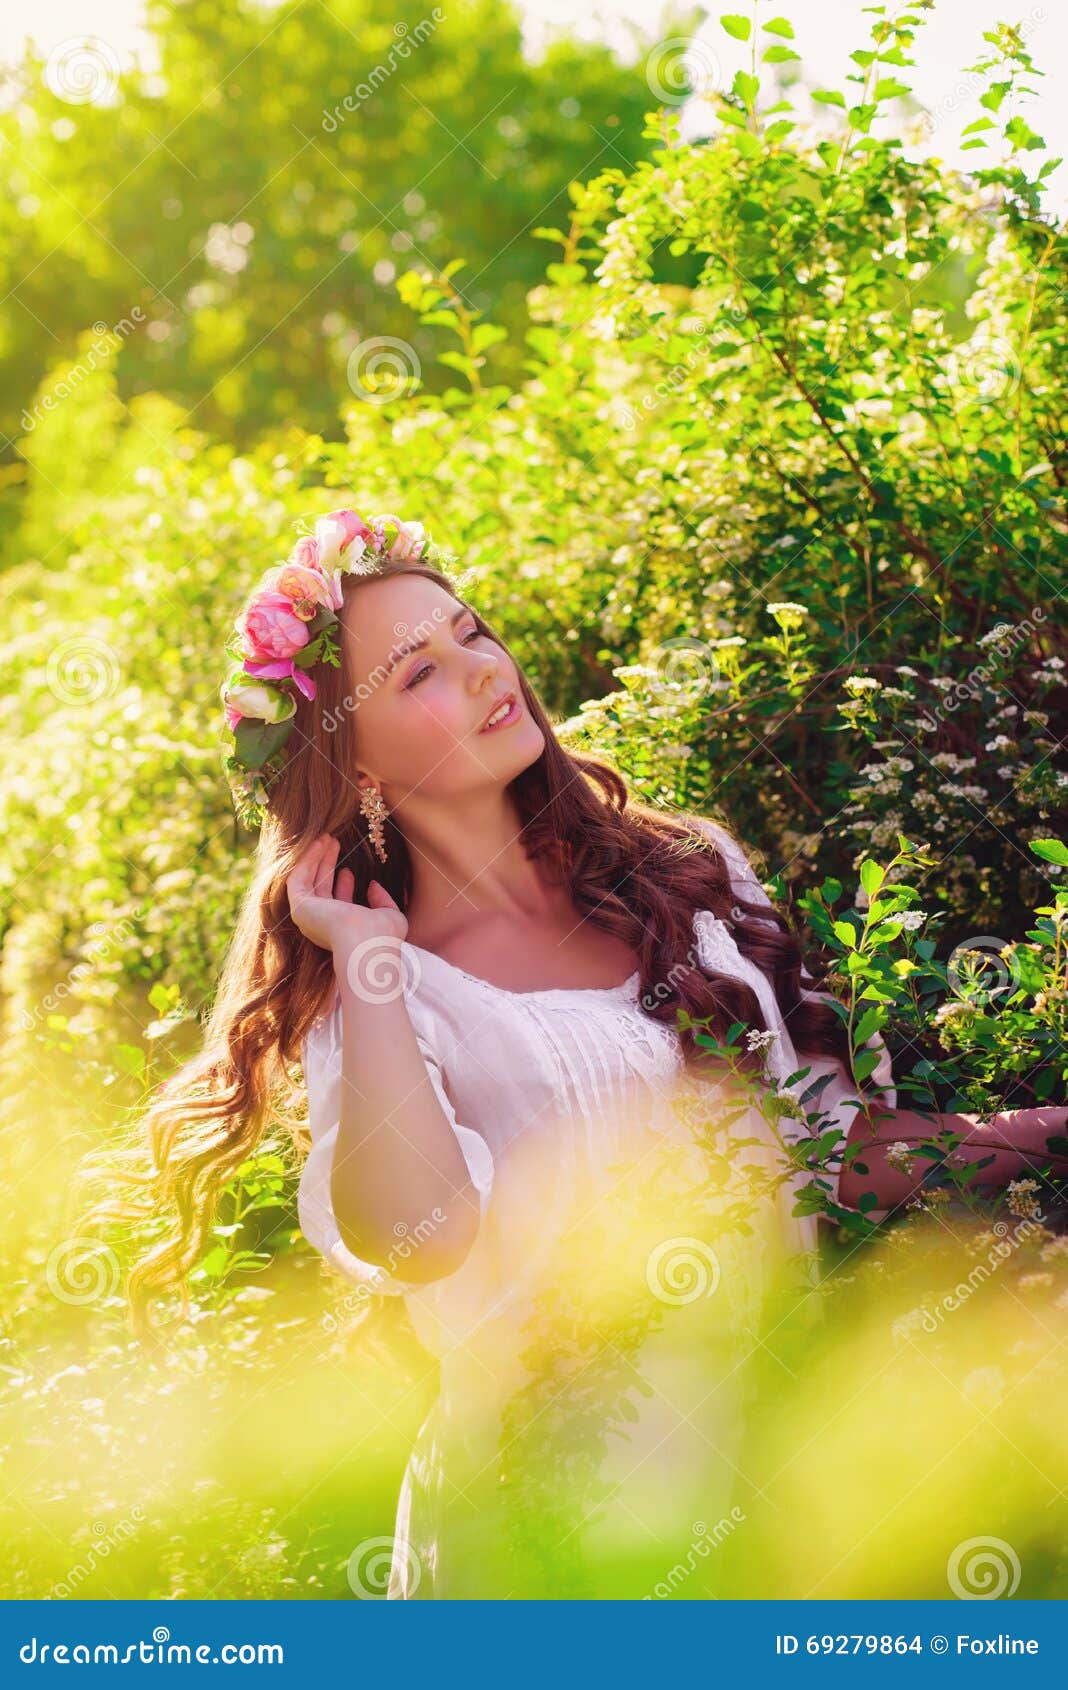 Young Beautiful Girl with Long Hair in Floral Wreath in the Spring ...